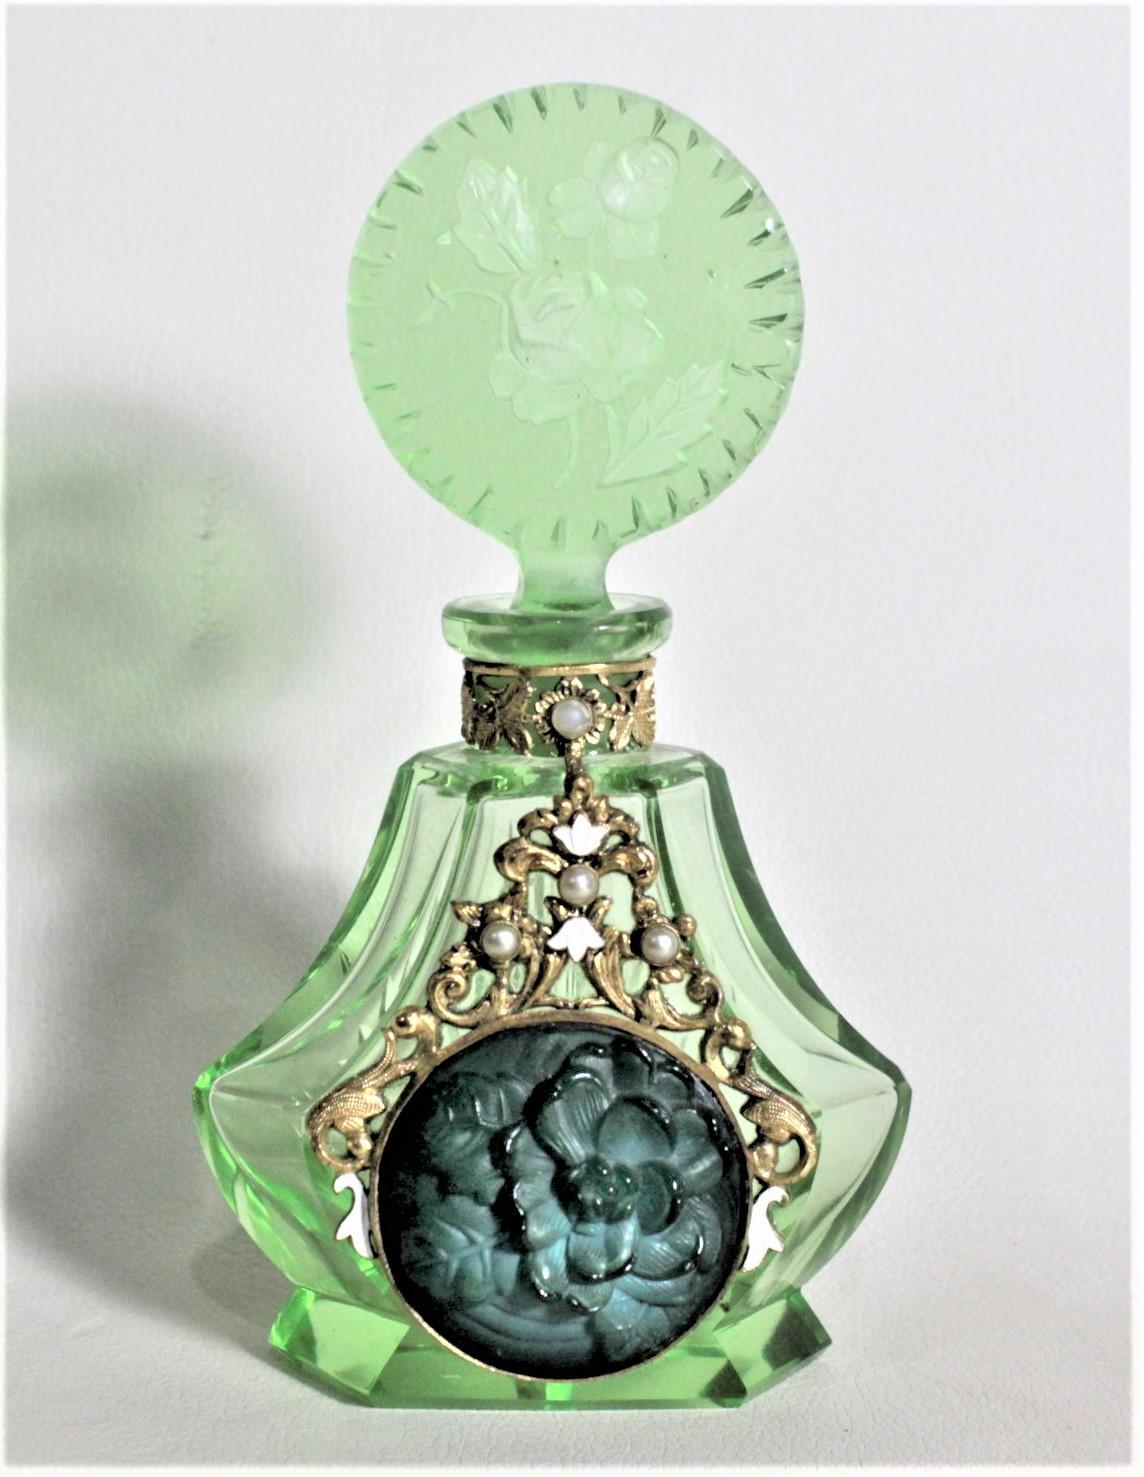 This Art Deco perfume or scent bottle is unsigned, so the artist cannot be identified, but was made in Bohemia in approximately 1935. The glass is a deep green with deep faceted sides and etched and cut top. The bottle features an ornate gold toned